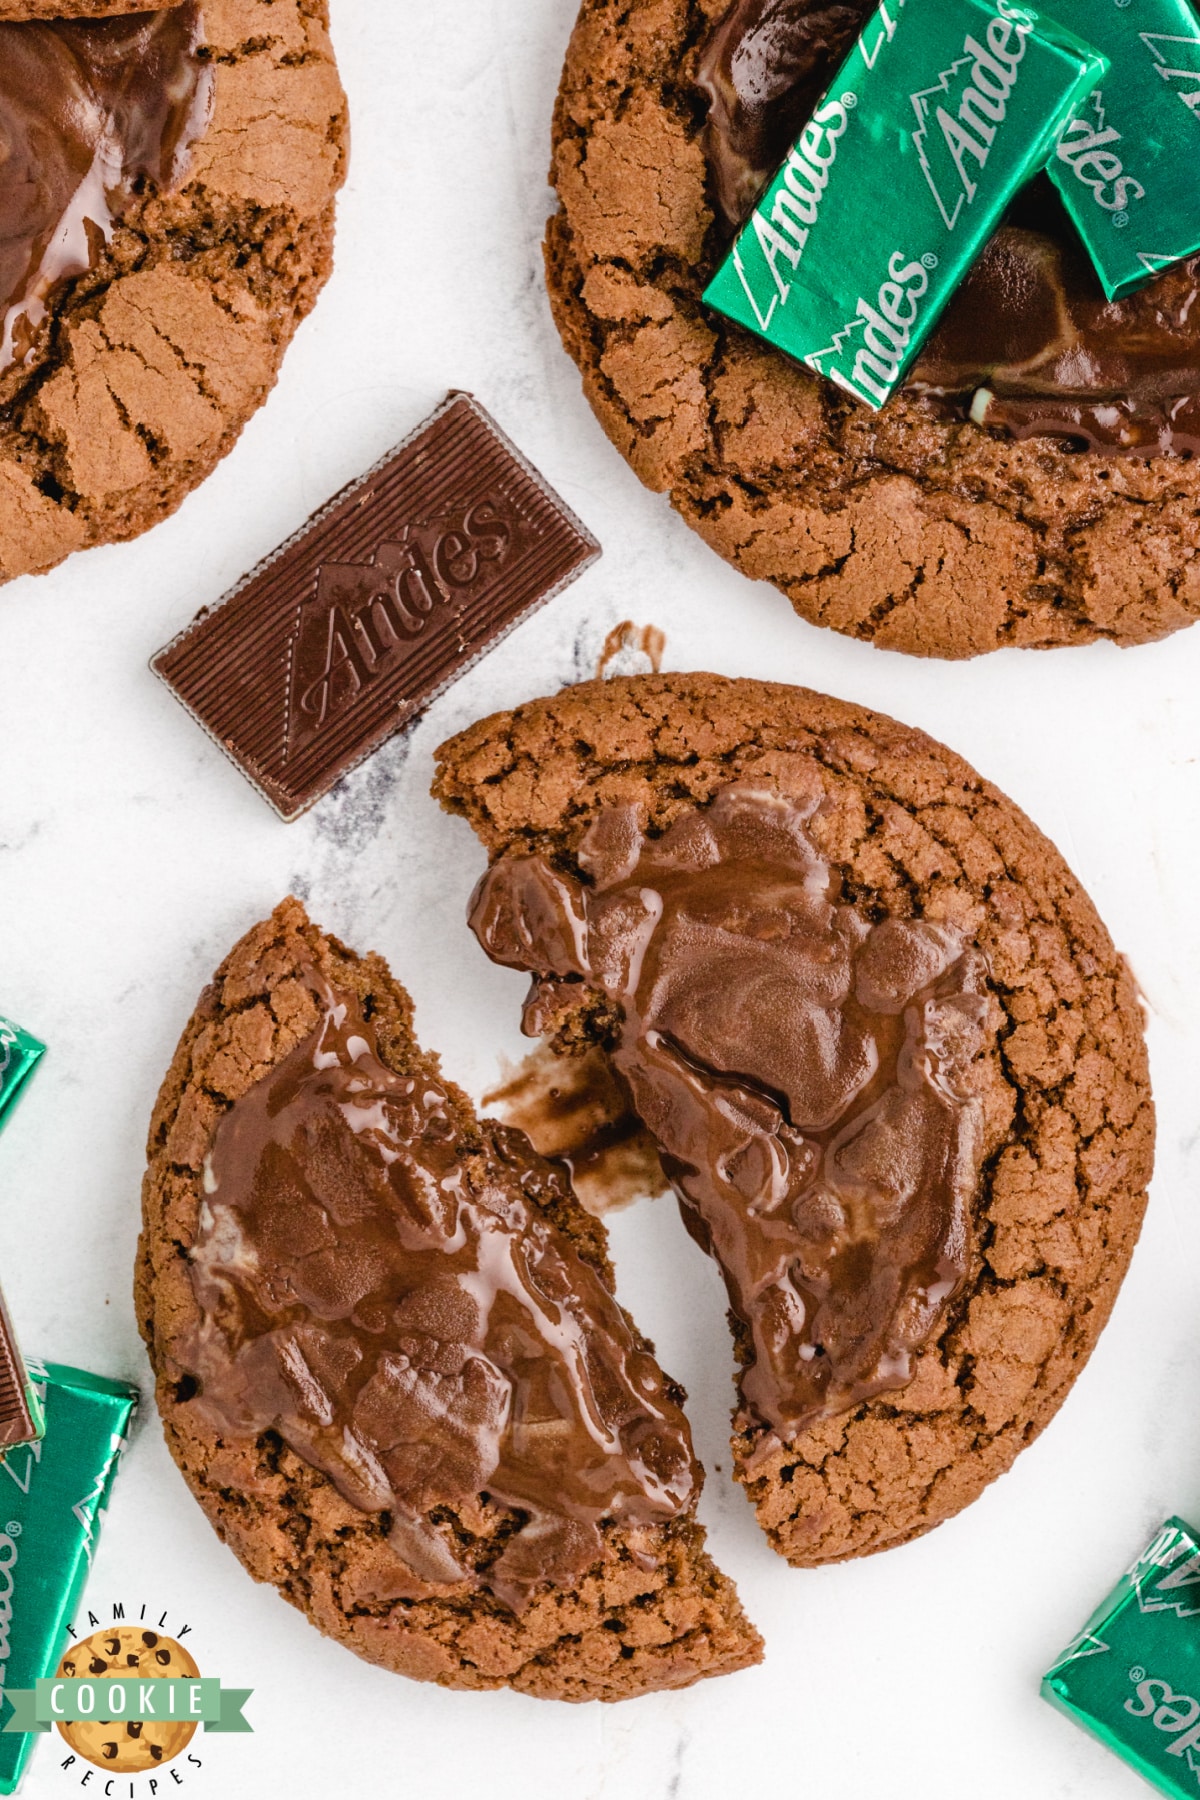 Andes Mint Chocolate Cookies are chewy, chocolate and frosted with a melted Andes mint! These cookies are the perfect combination of chocolate and mint.